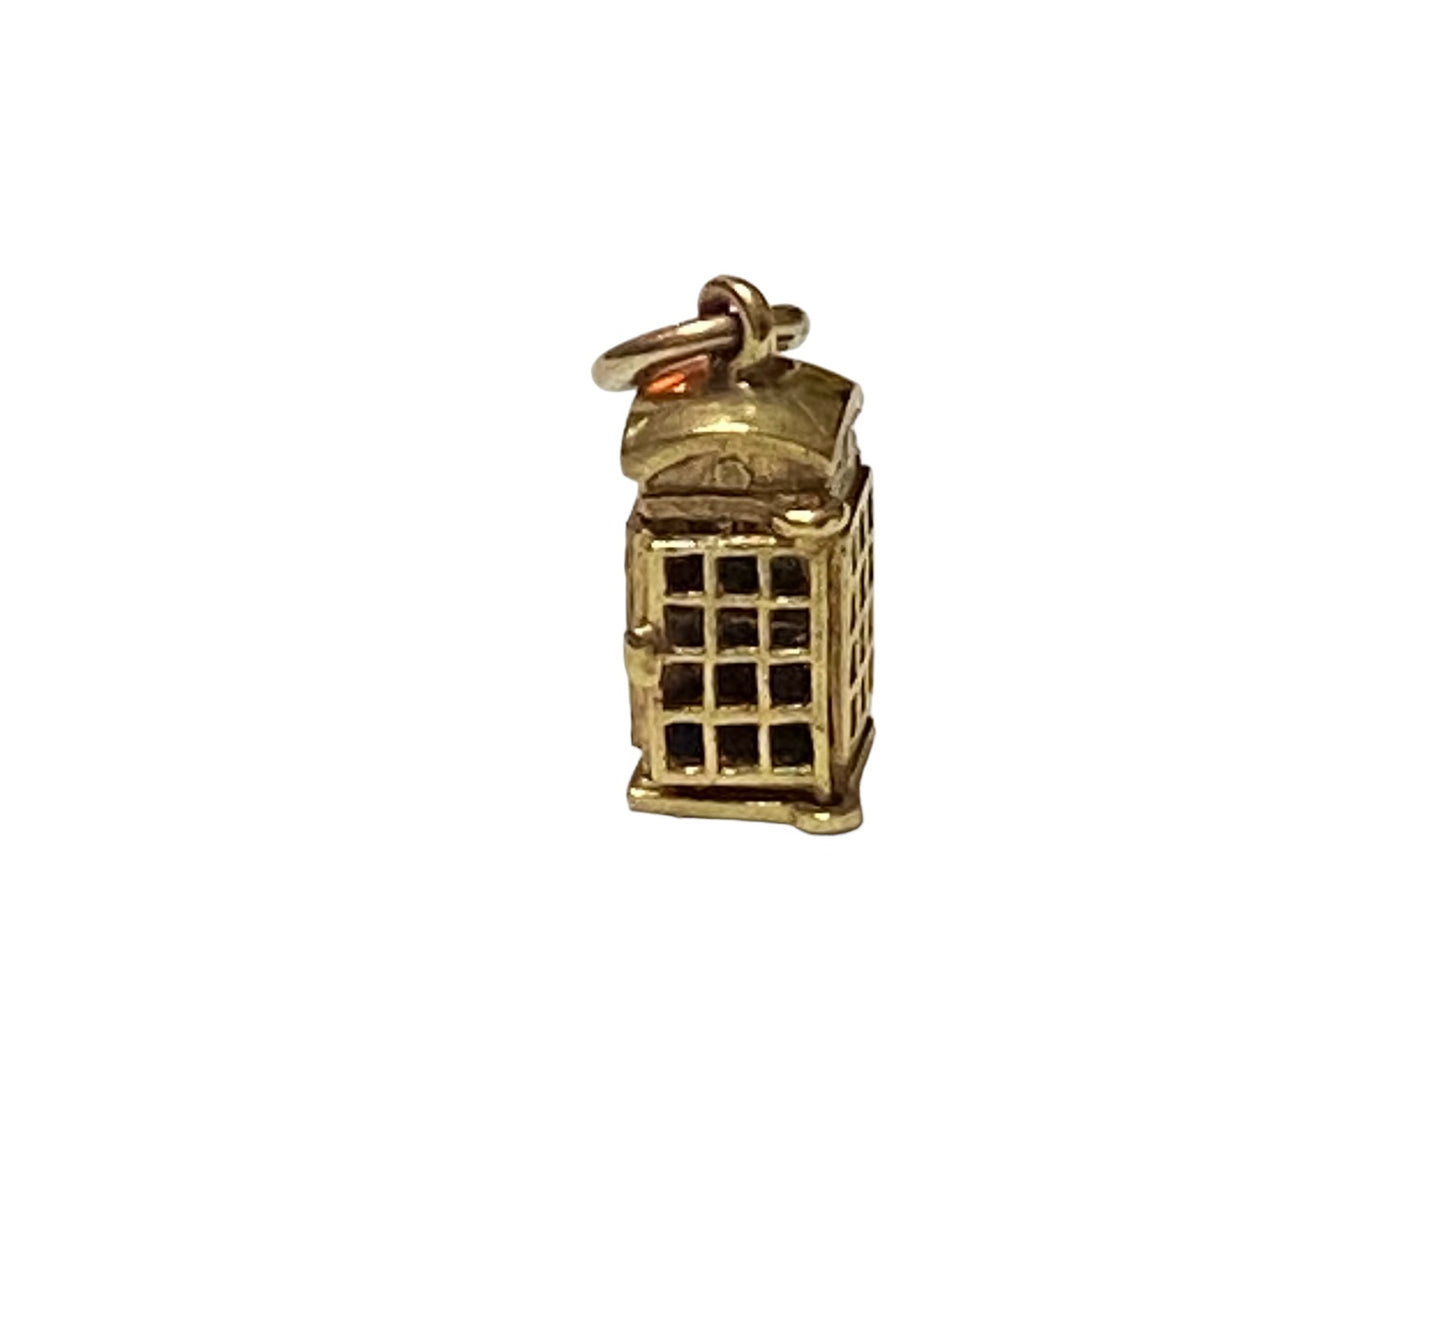 9ct vintage telephone booth charm. opening